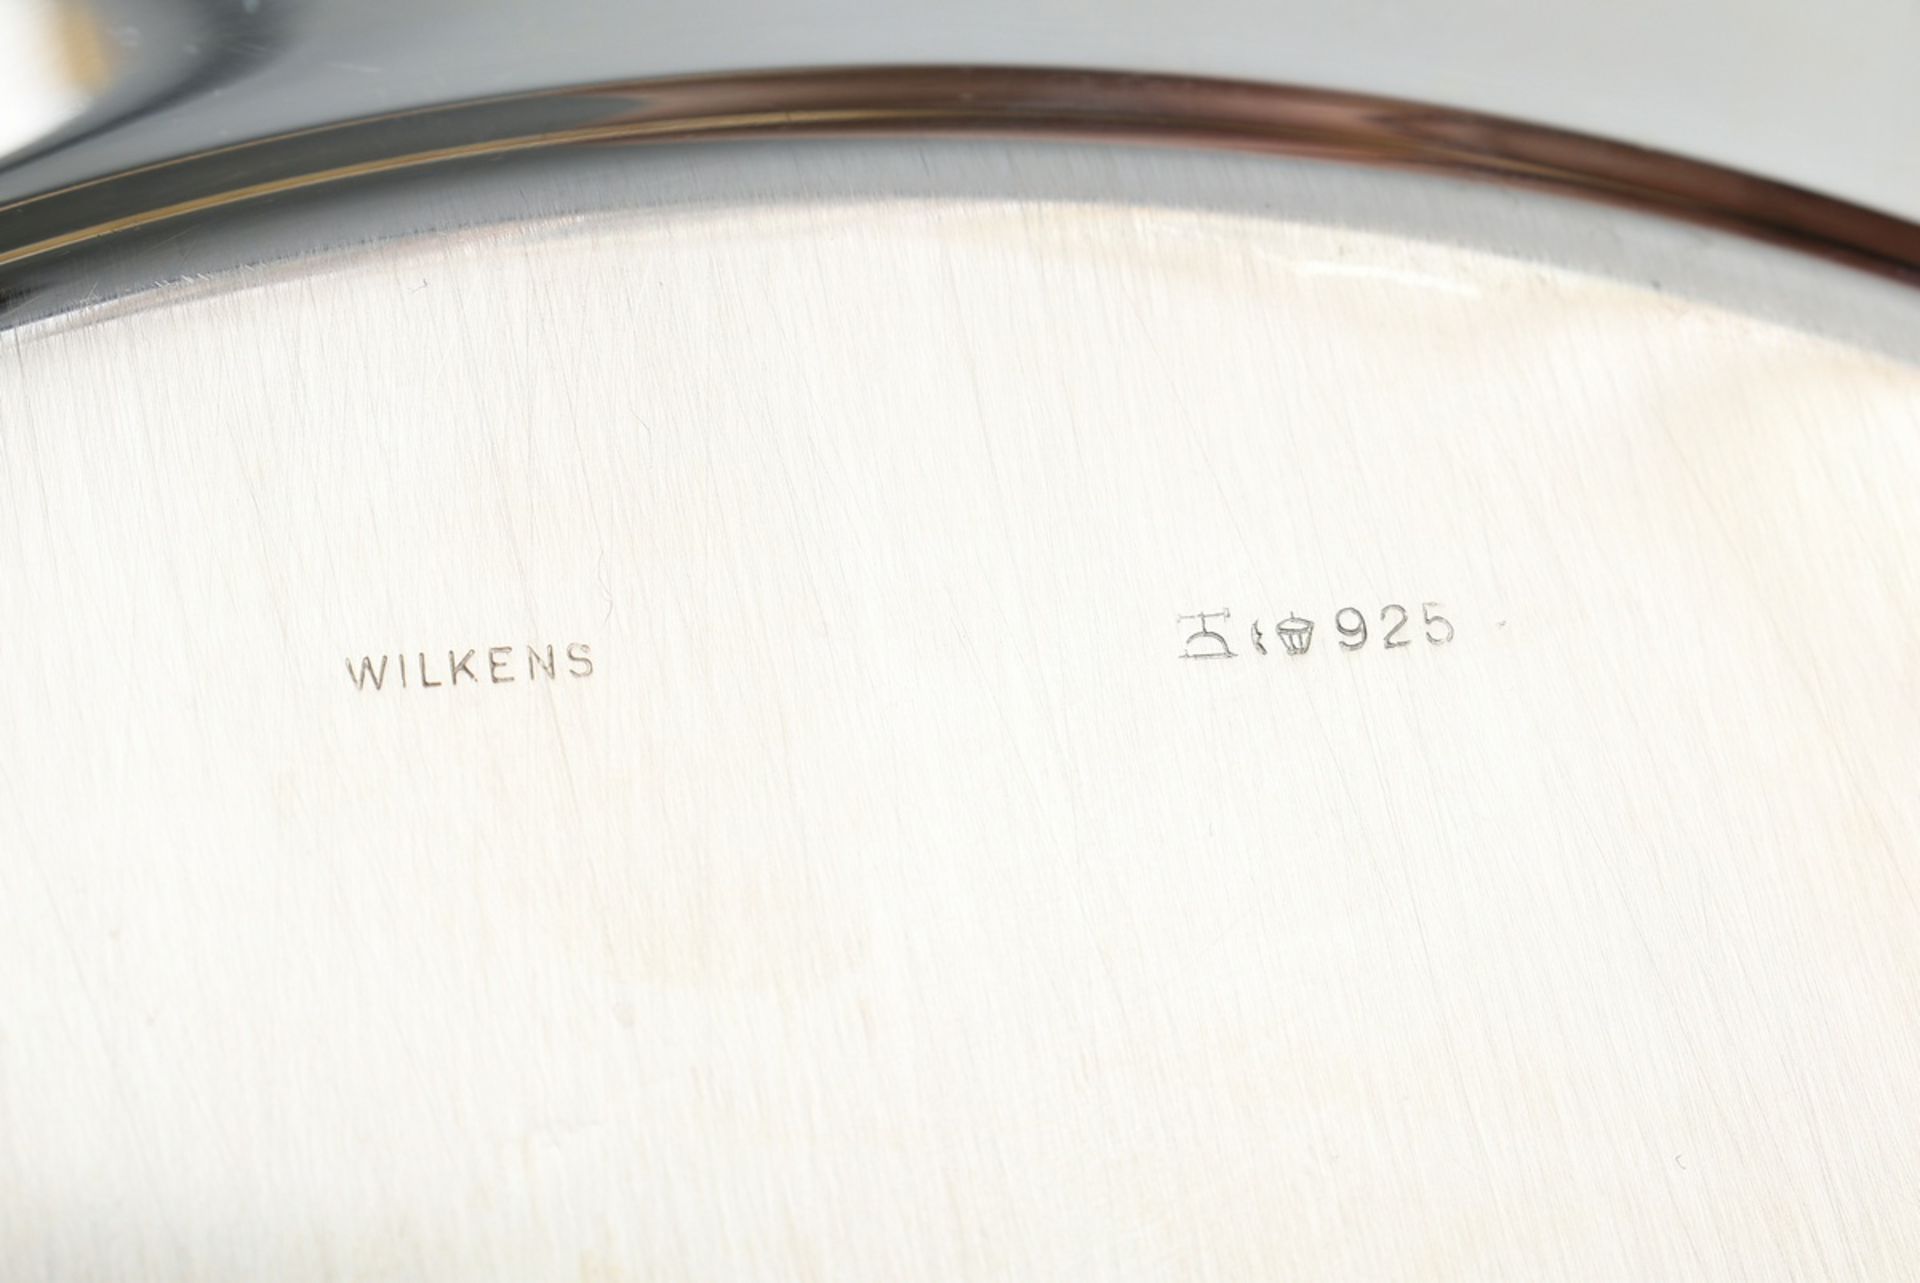 6 Modern place plates in a simple design, Wilkens, silver 925, 6240g, Ø 32cm, in original sleeves - Image 4 of 7